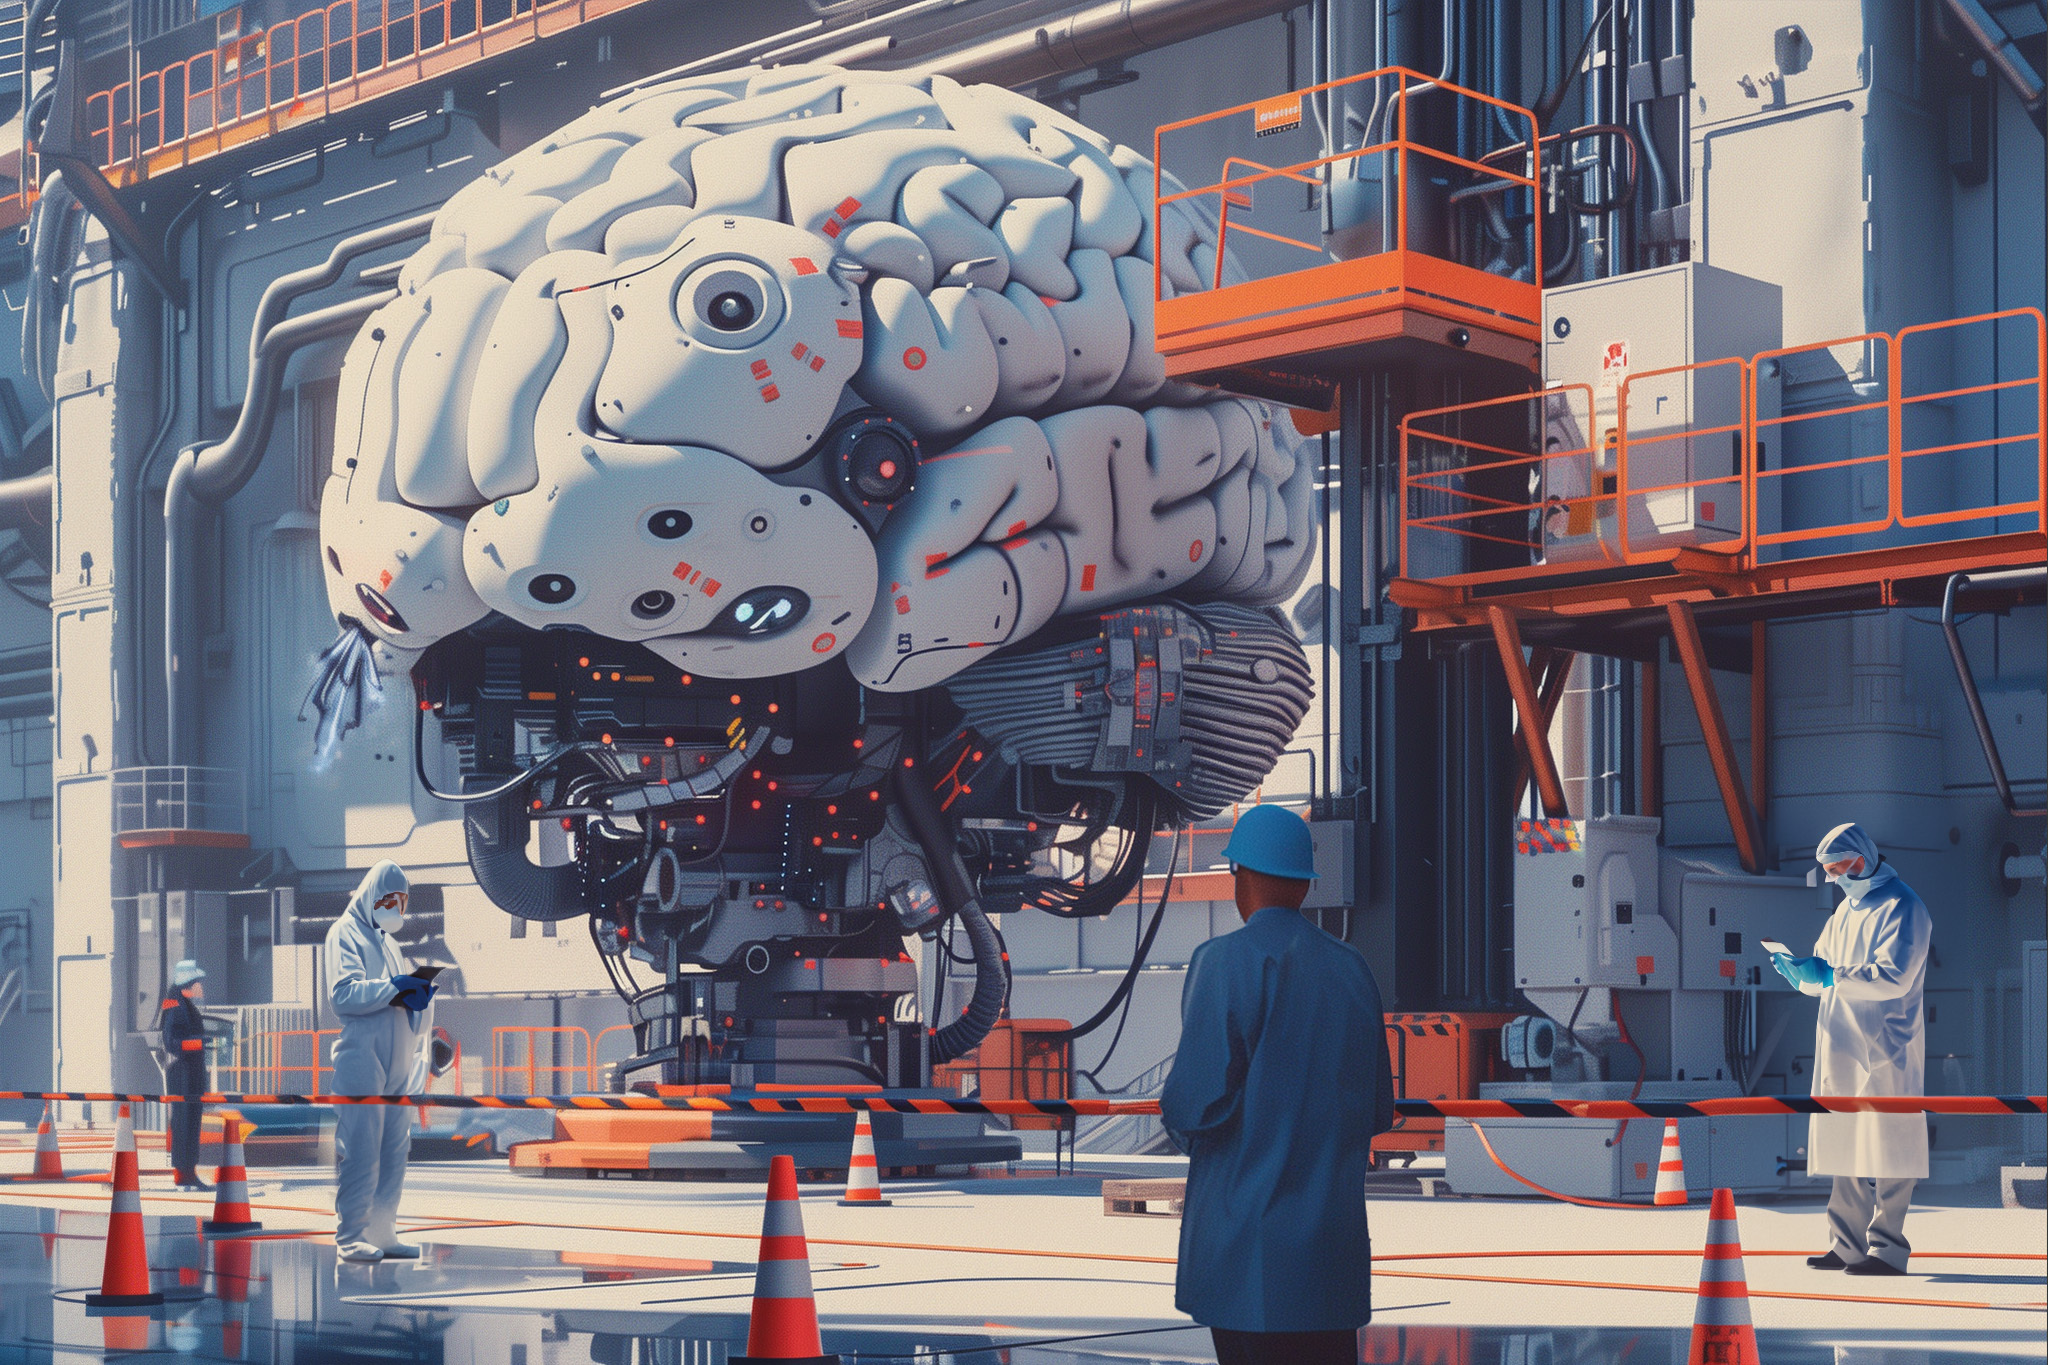 The image depicts a large mechanical brain in an industrial setting with workers in protective gear examining equipment, surrounded by scaffolding and safety cones.